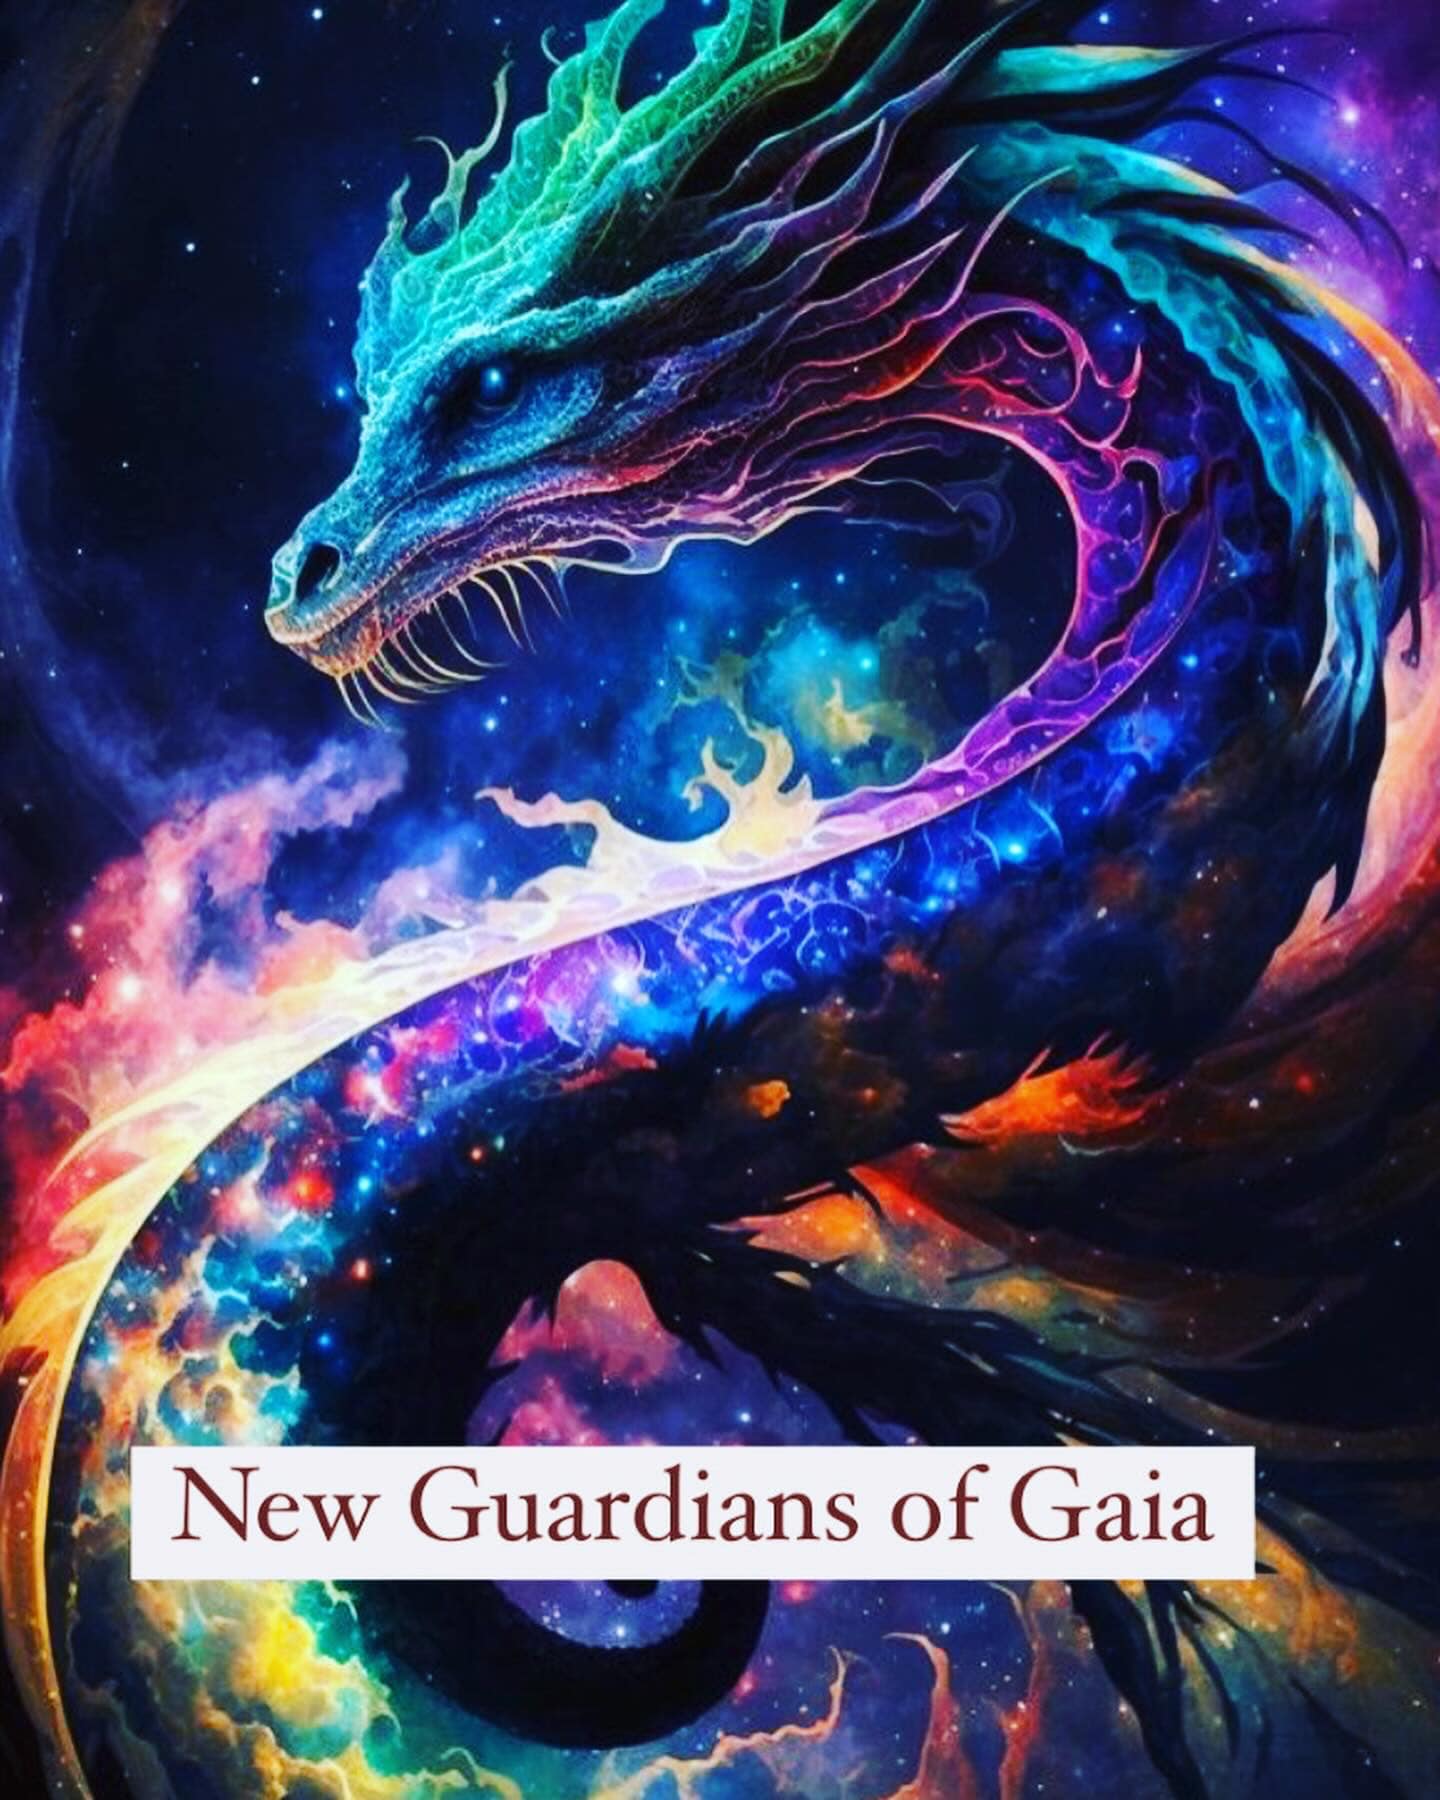 Galactic Dragons are returning